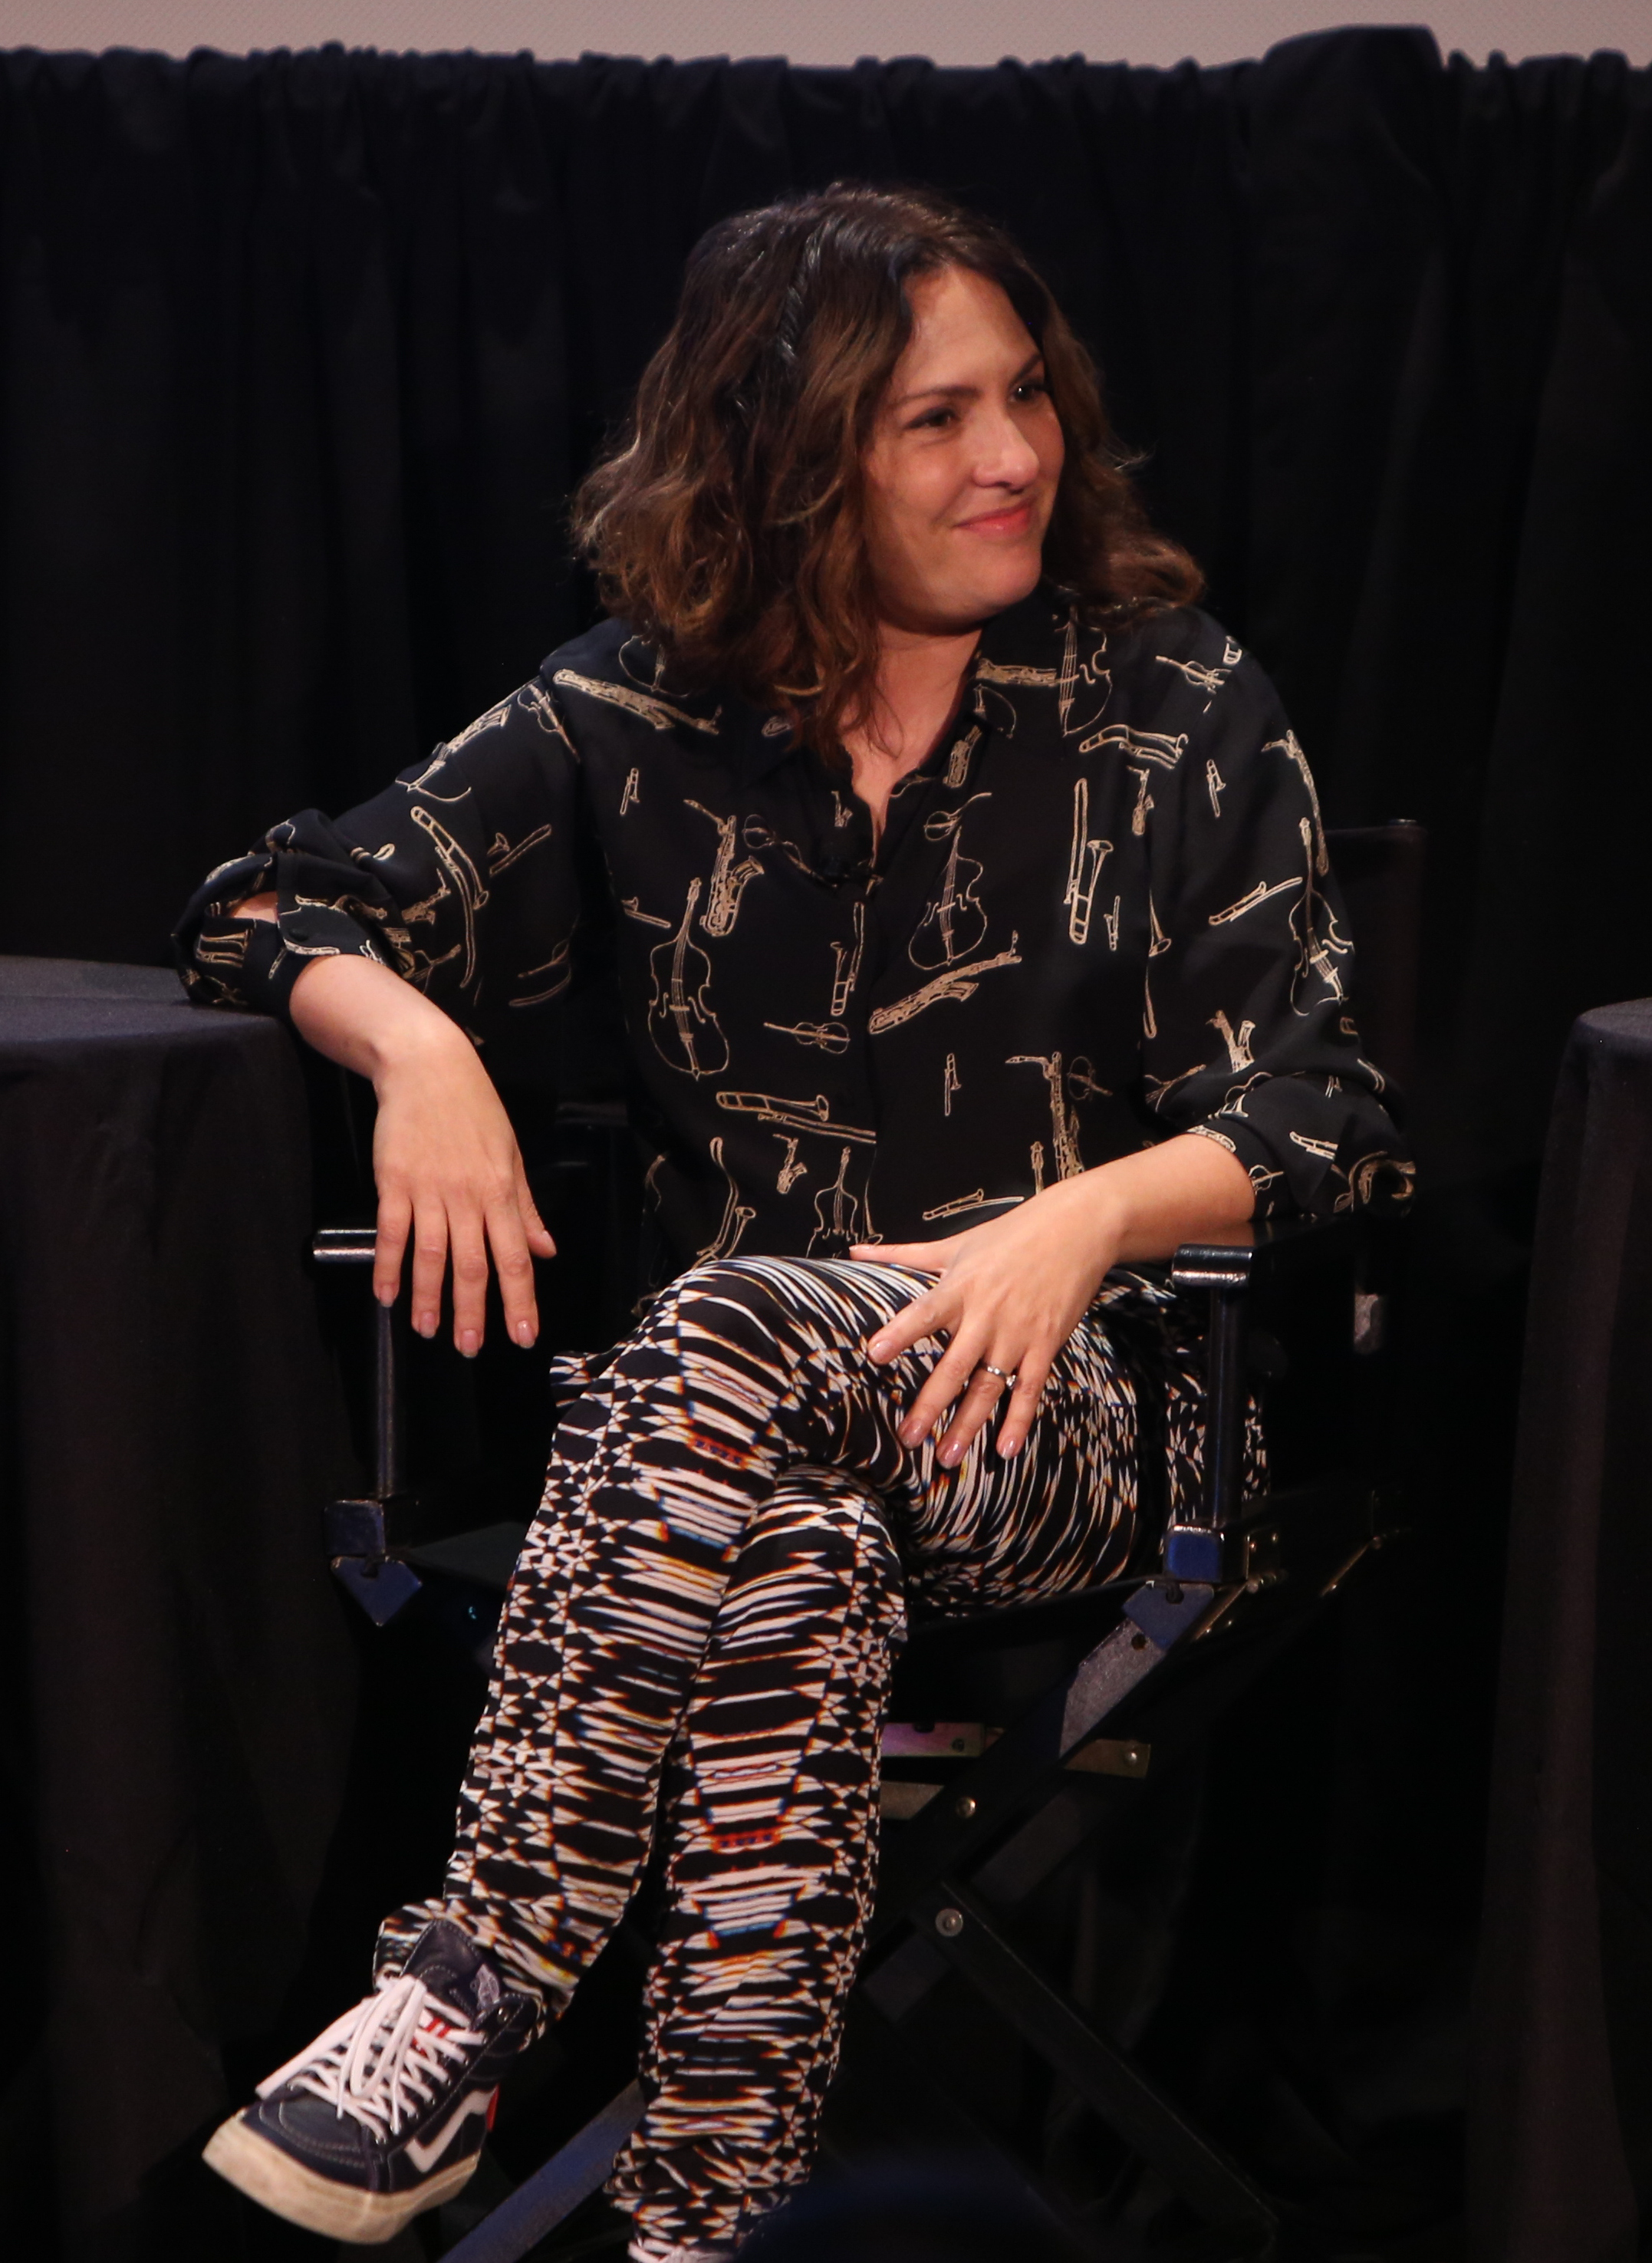 Comedian and TV Writer Jill Soloway attends LGBTQ TV on October 11, 2014 in New York City.